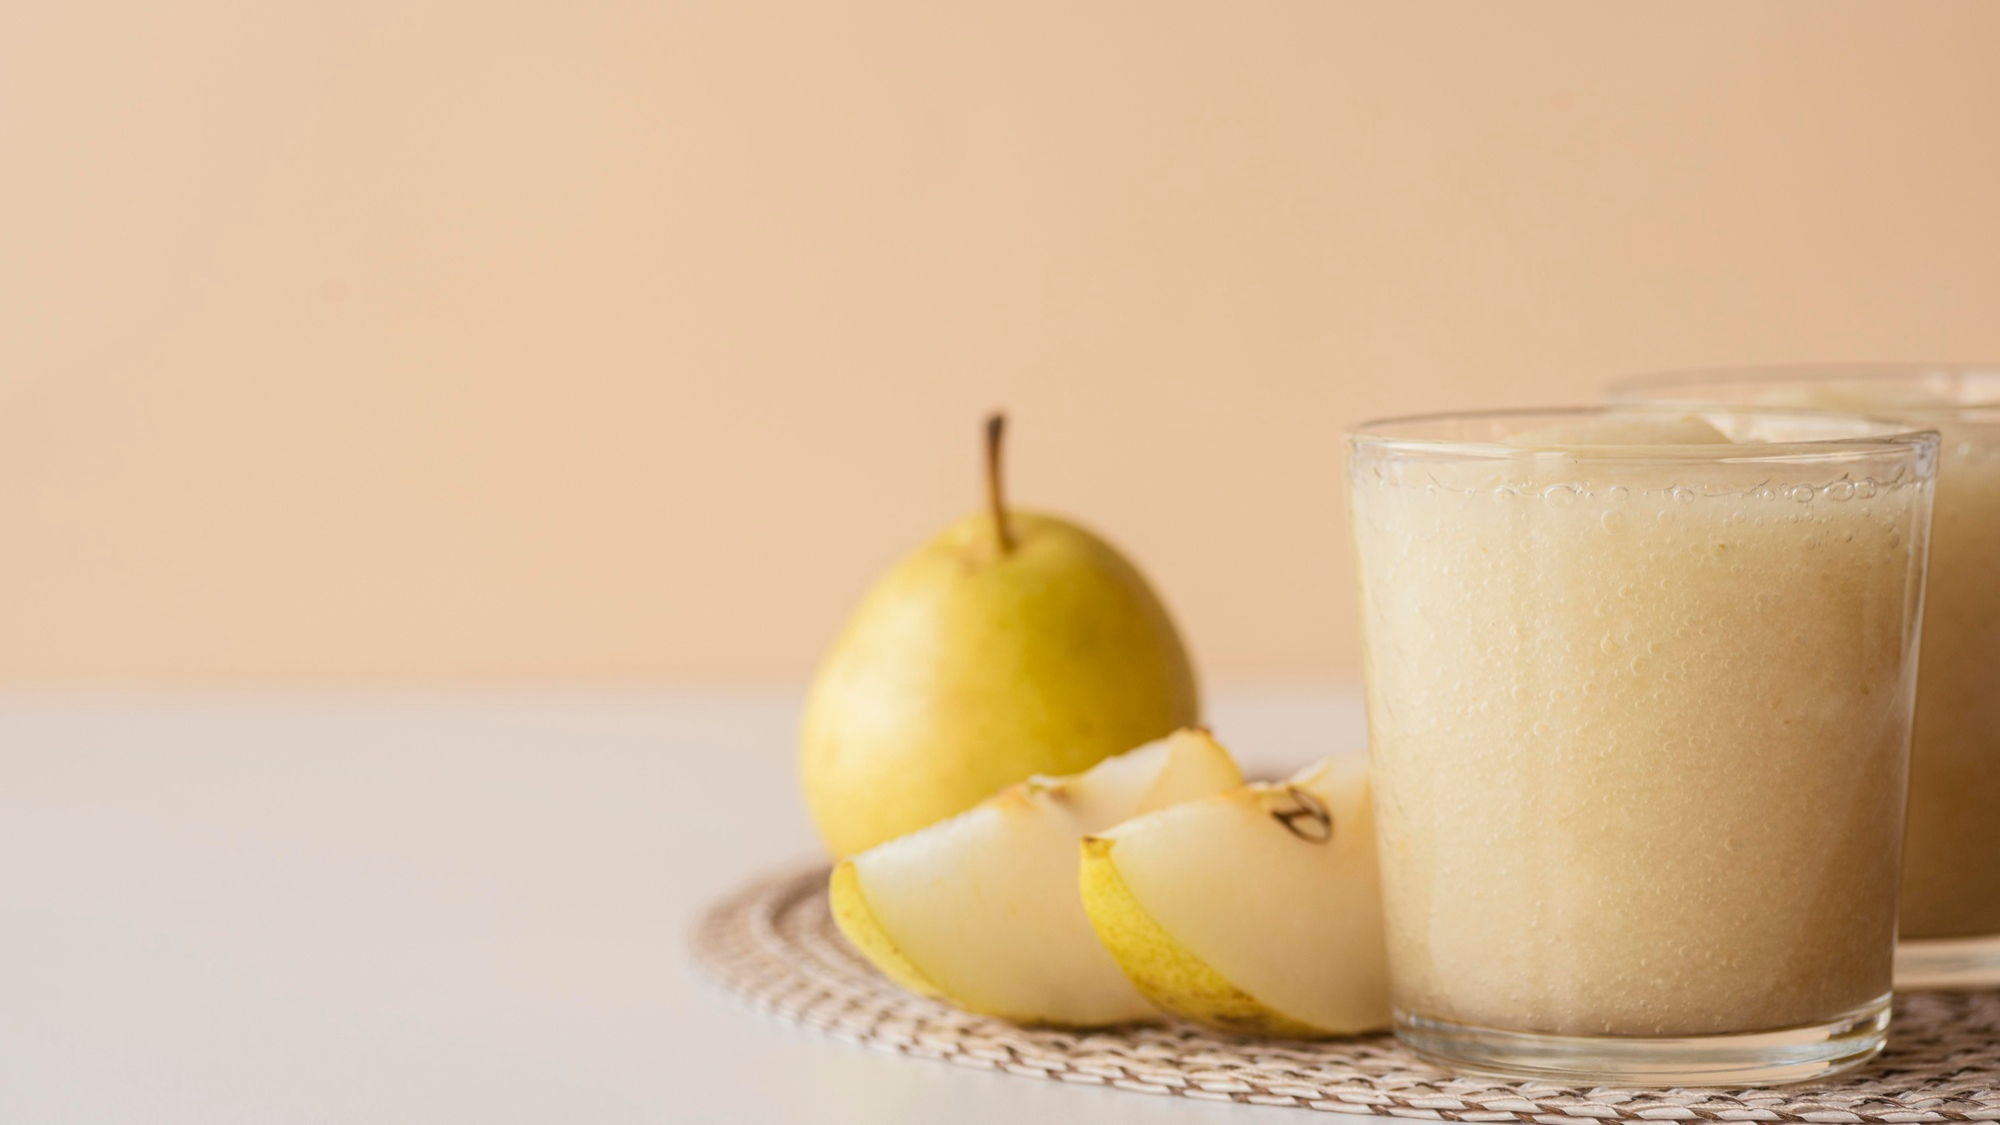 Pear Smoothie is healthy